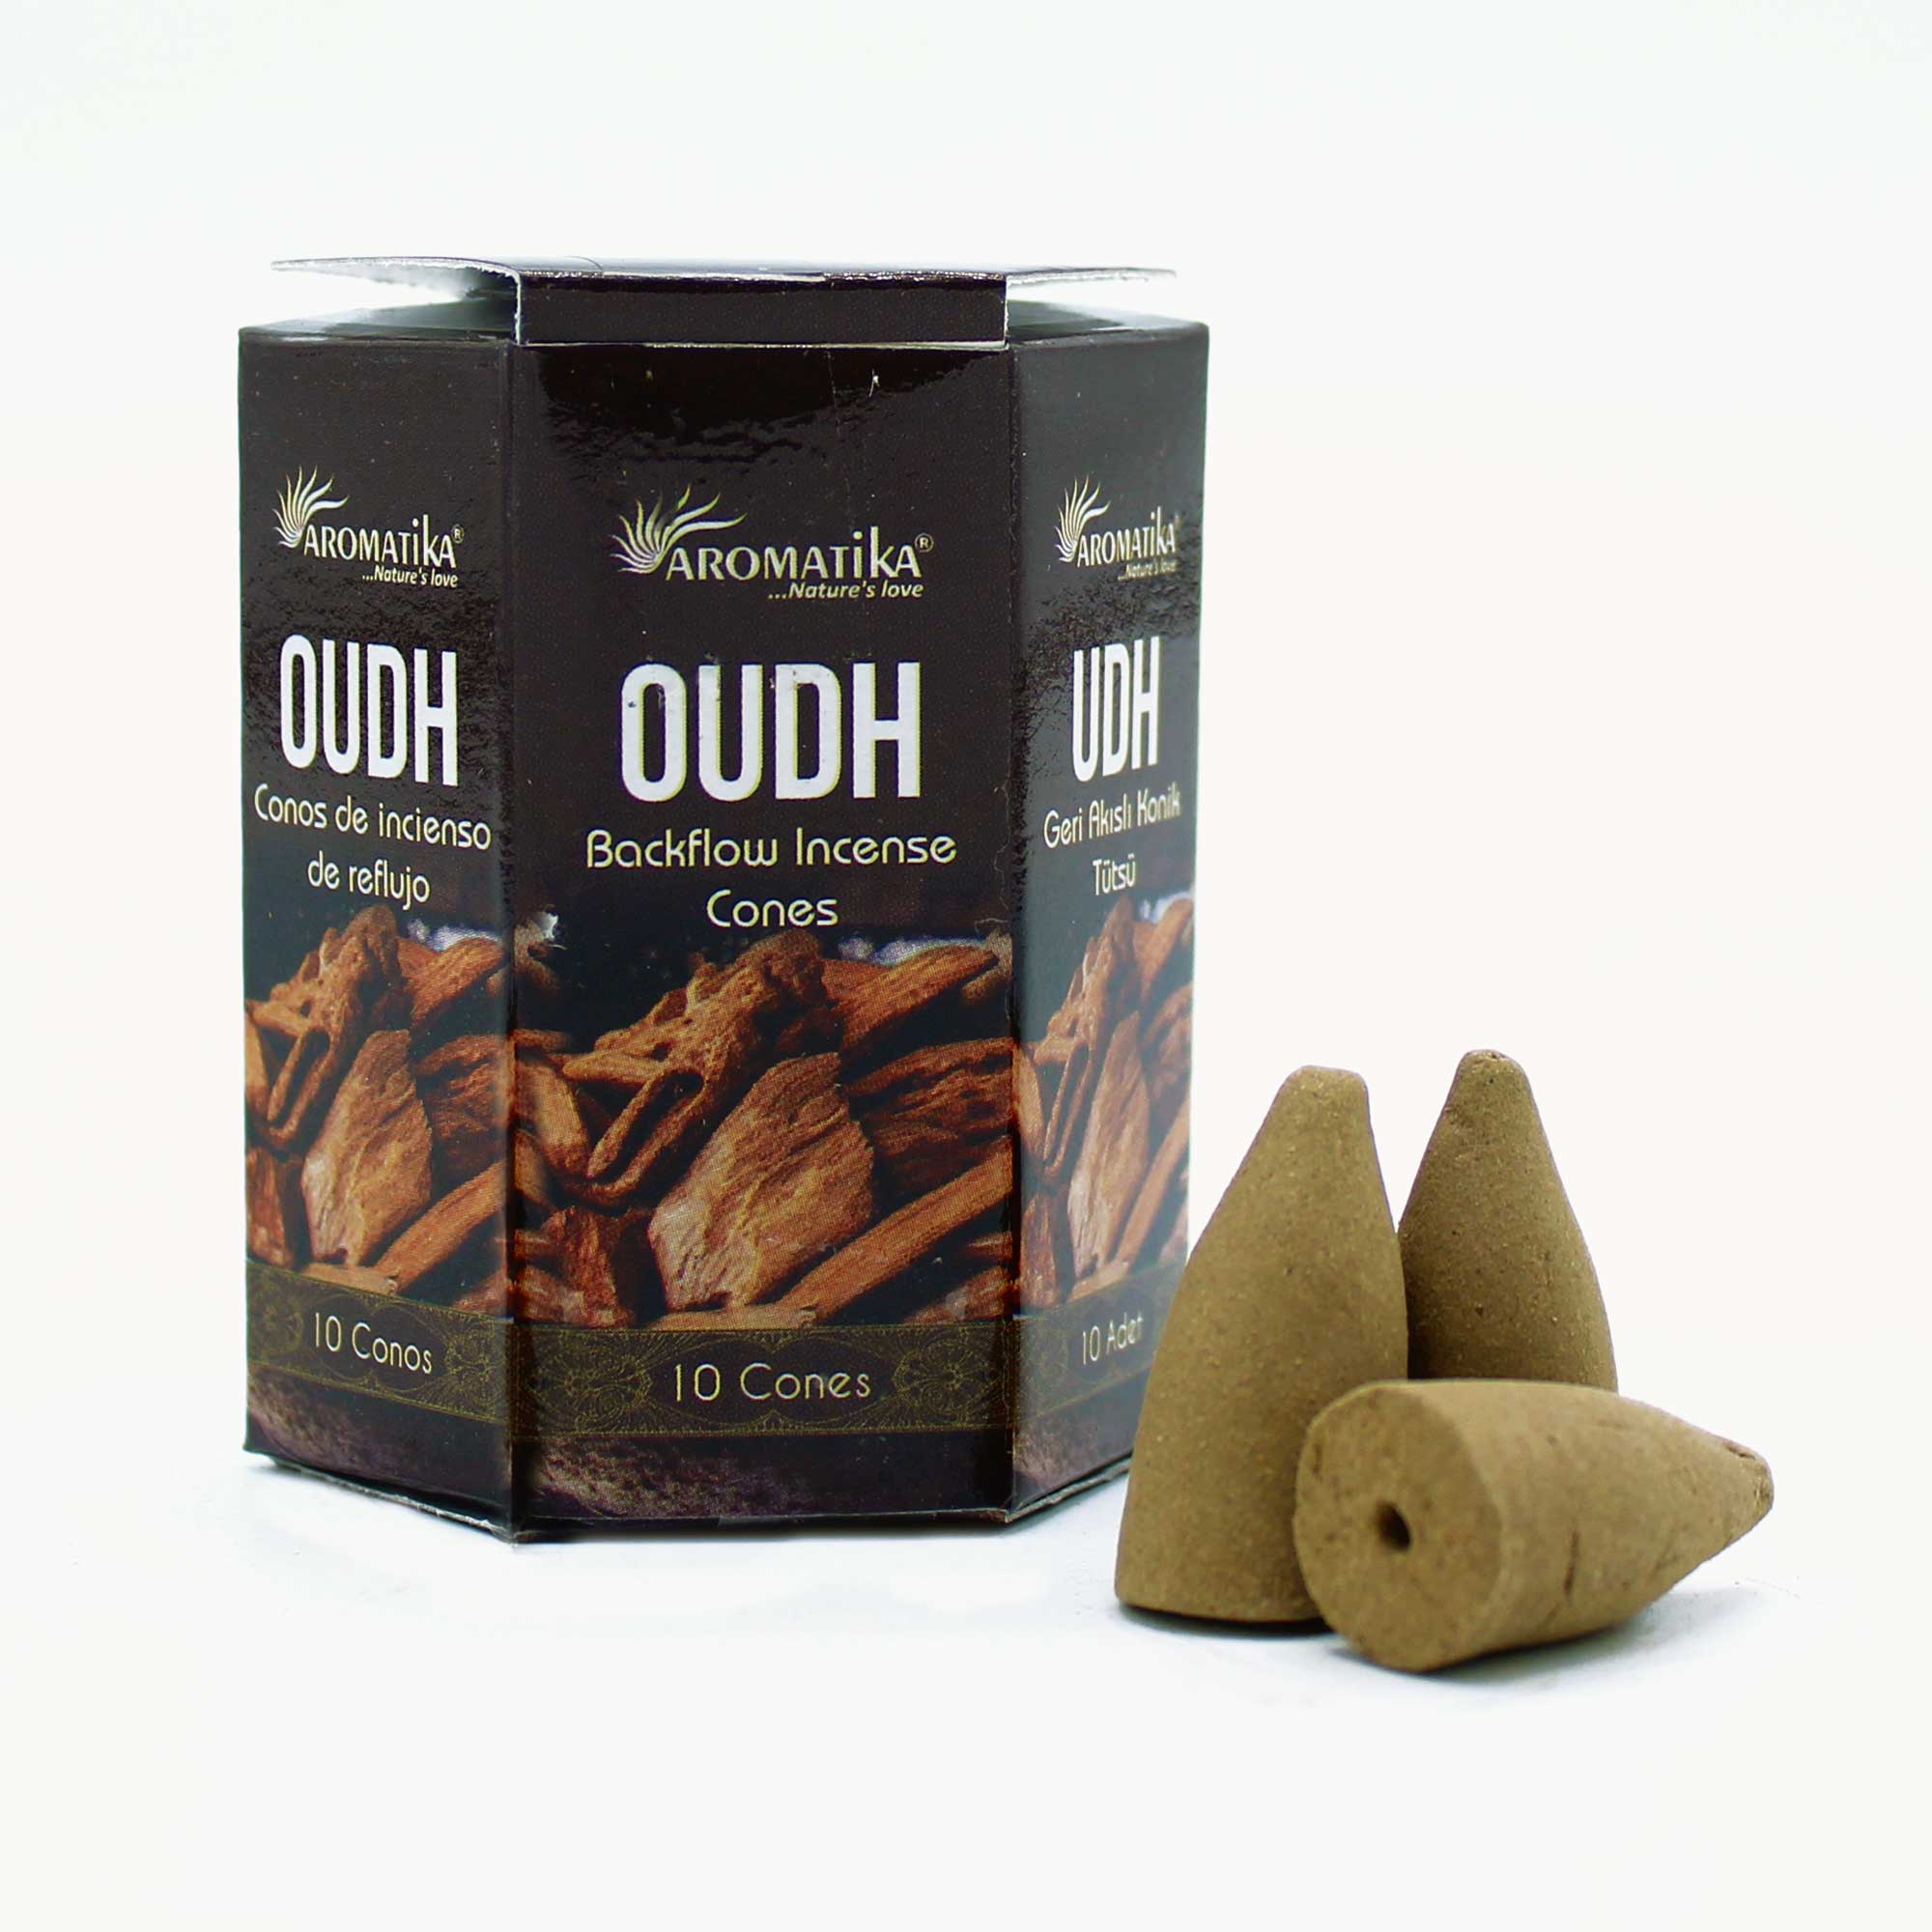 3 x Packs of 10 Masala Backflow Incense Cones - Oudh